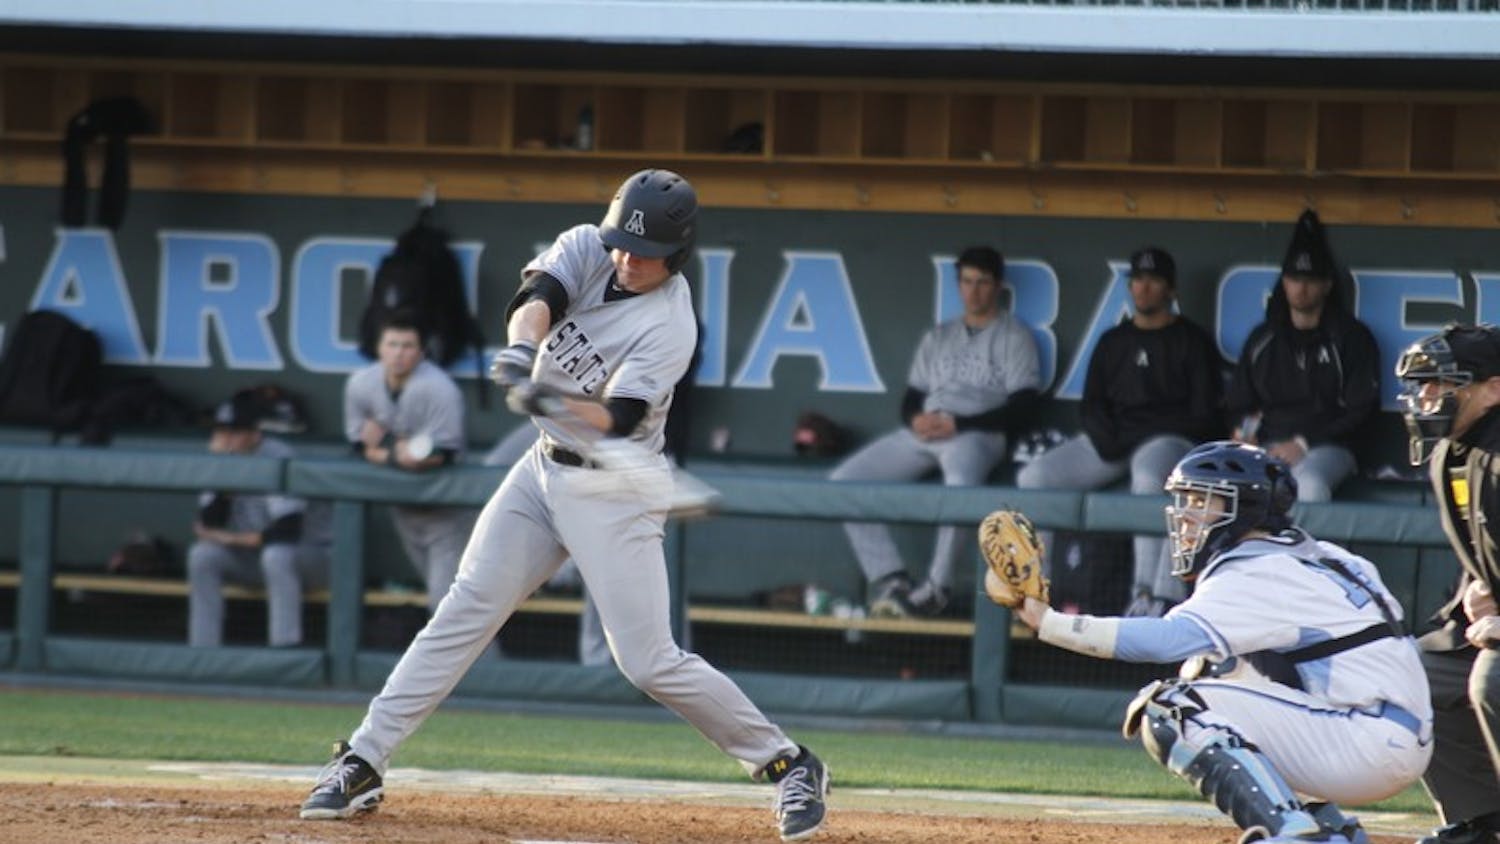 UNC beat Appalachian State 12-1 on Tuesday Feb. 25, 2014. The Diamond Heels extend their record to 4-3.